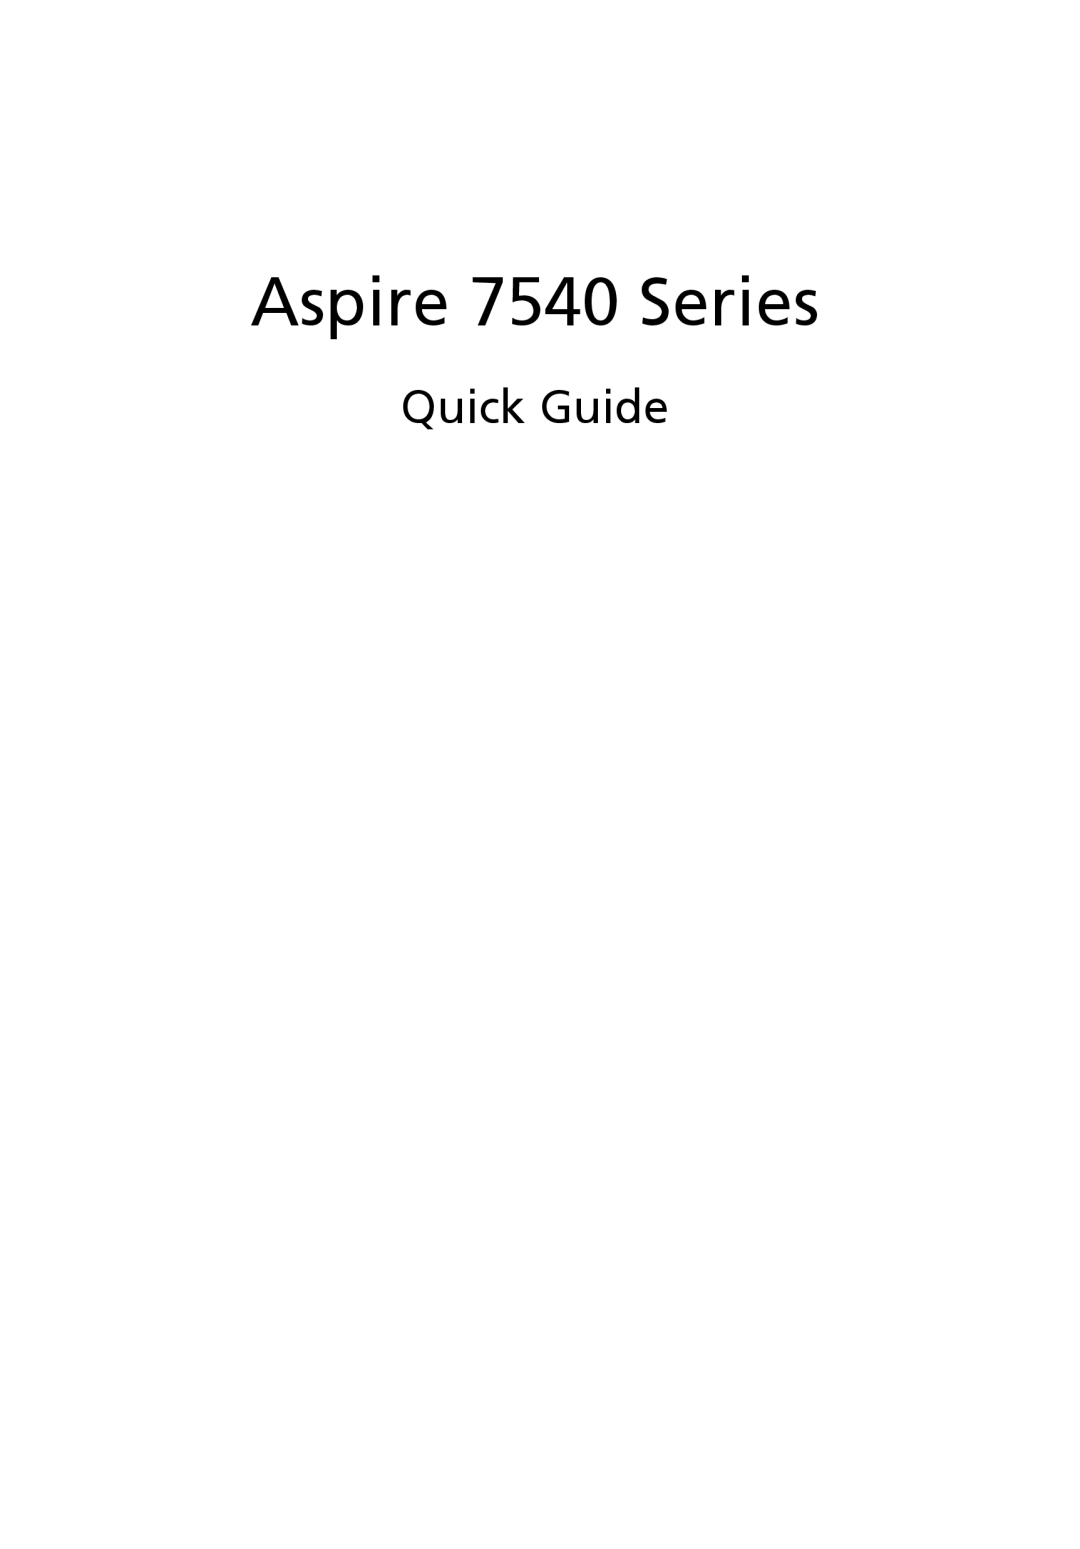 Acer manual Quick Guide, Aspire 7540 Series 